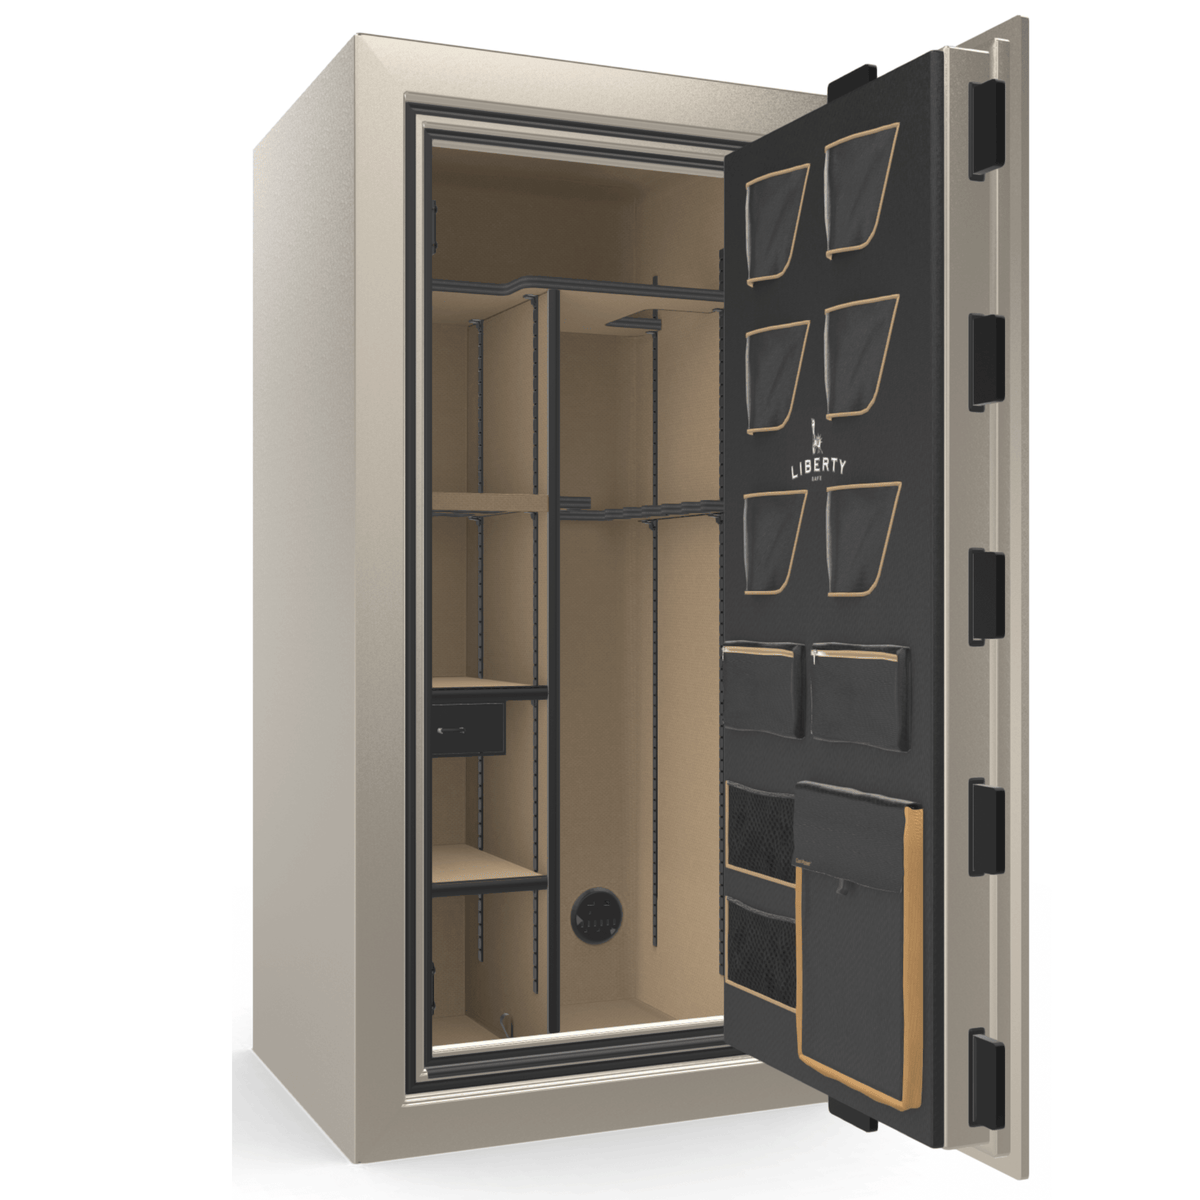 Liberty Safe Classic Plus 25 in Feathered Champagne Gloss, open door.